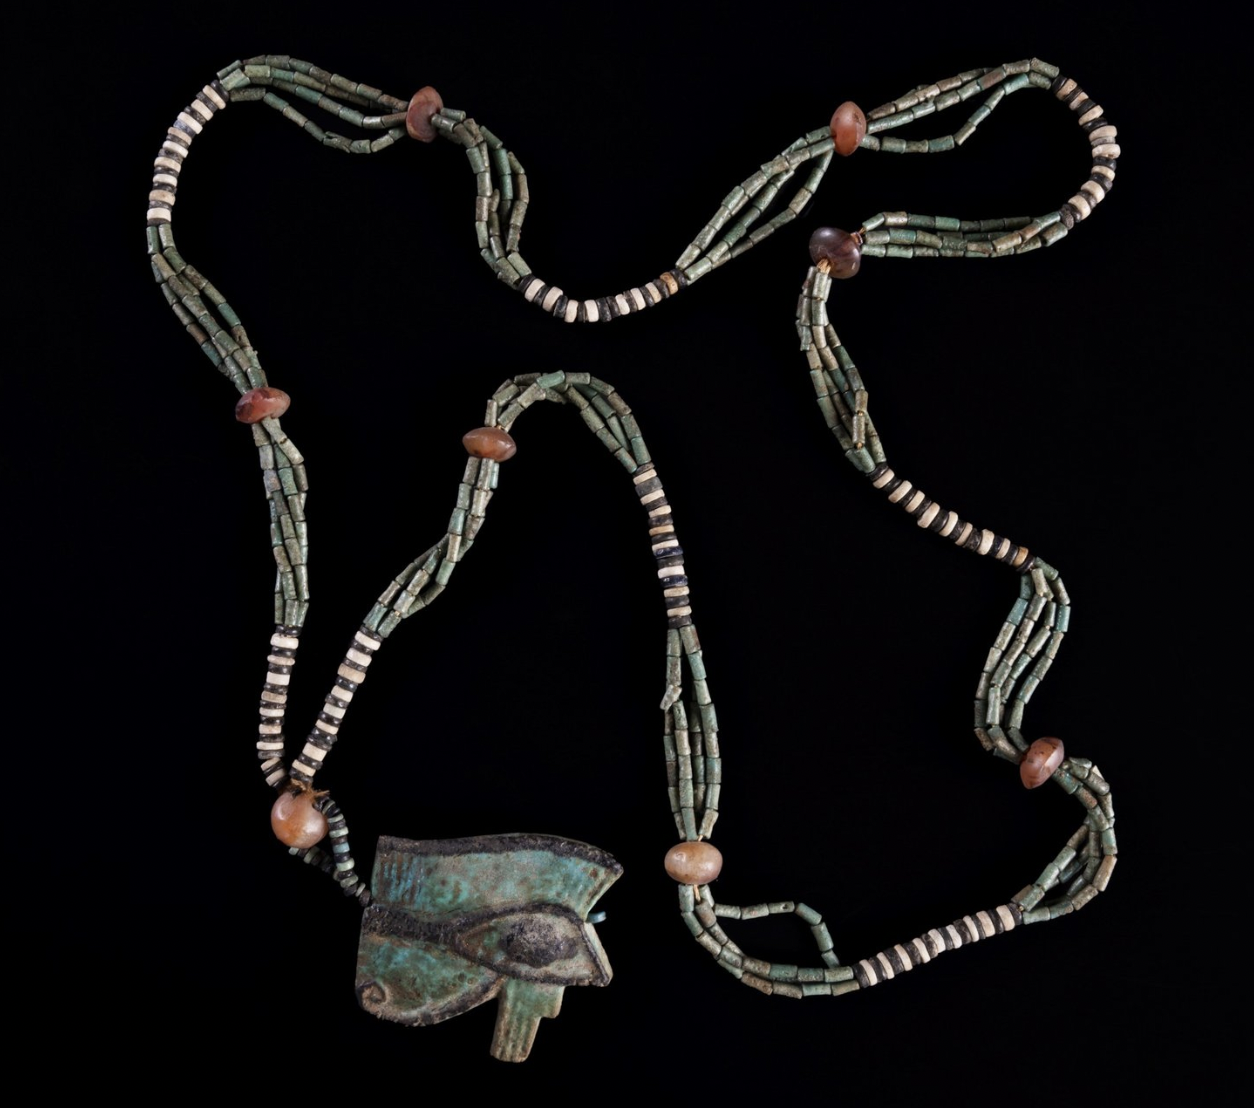 Virtual Tour Sacred Adornment Jewelry As Belief In Ancient Egypt